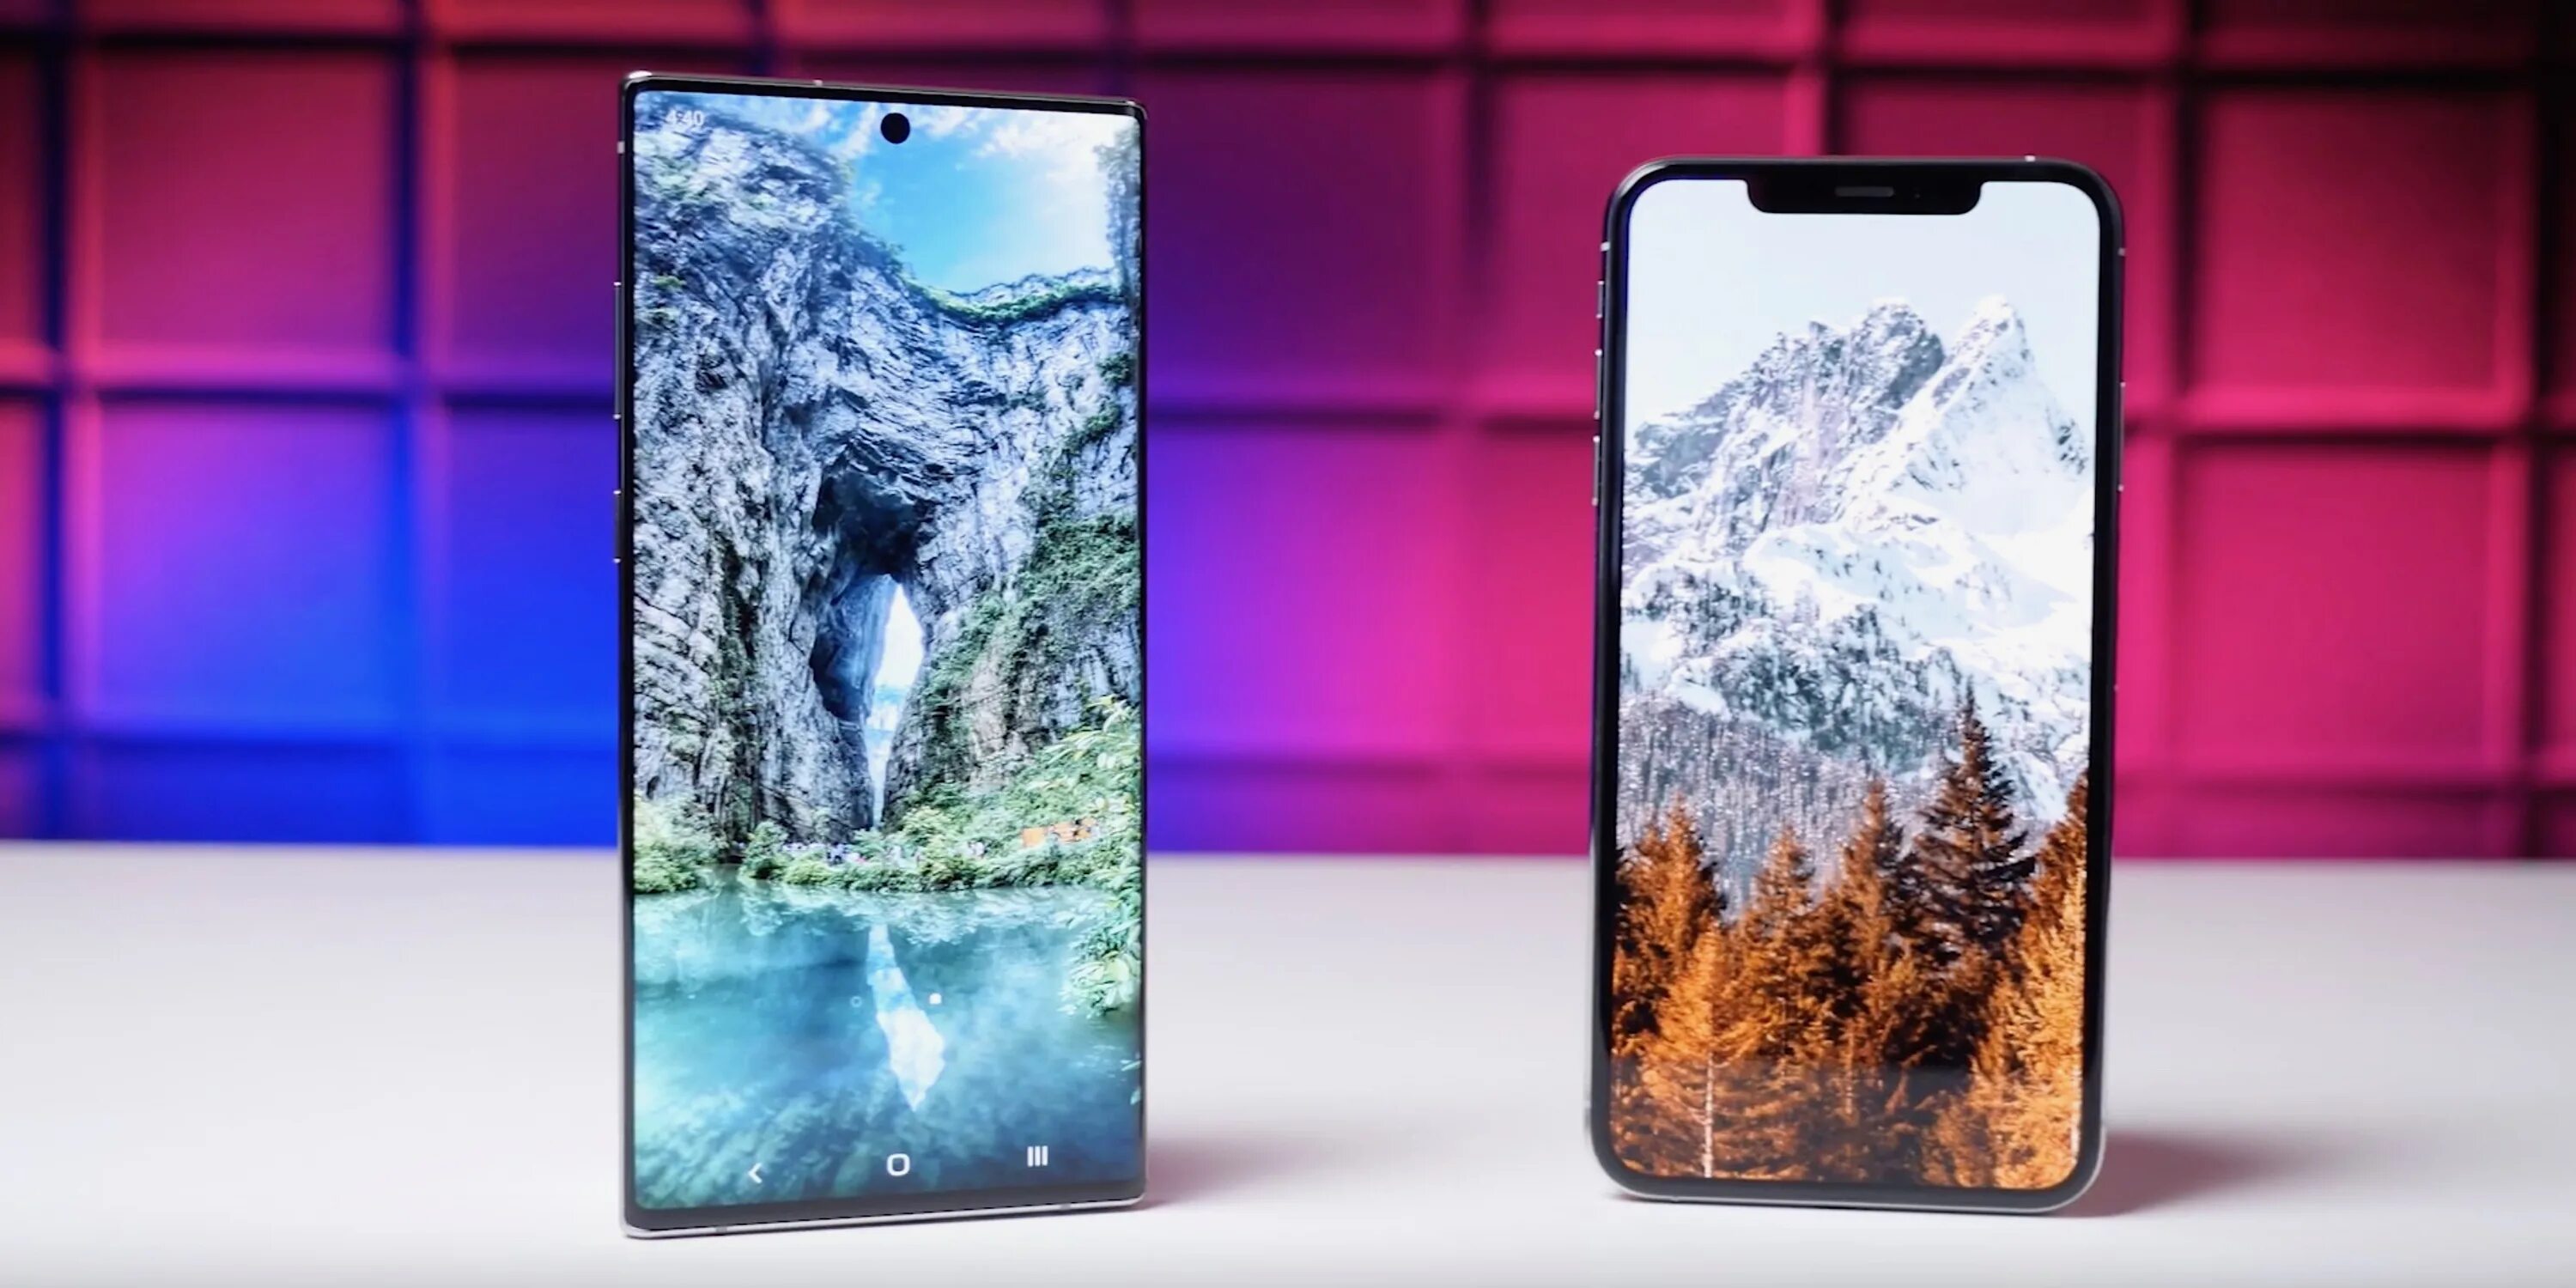 Samsung note 10 vs 10. Samsung Galaxy Note 10 iphone XS. Samsung Galaxy Note 10 Plus. Samsung Note 10 vs XS Max. Samsung Note 10 Max.